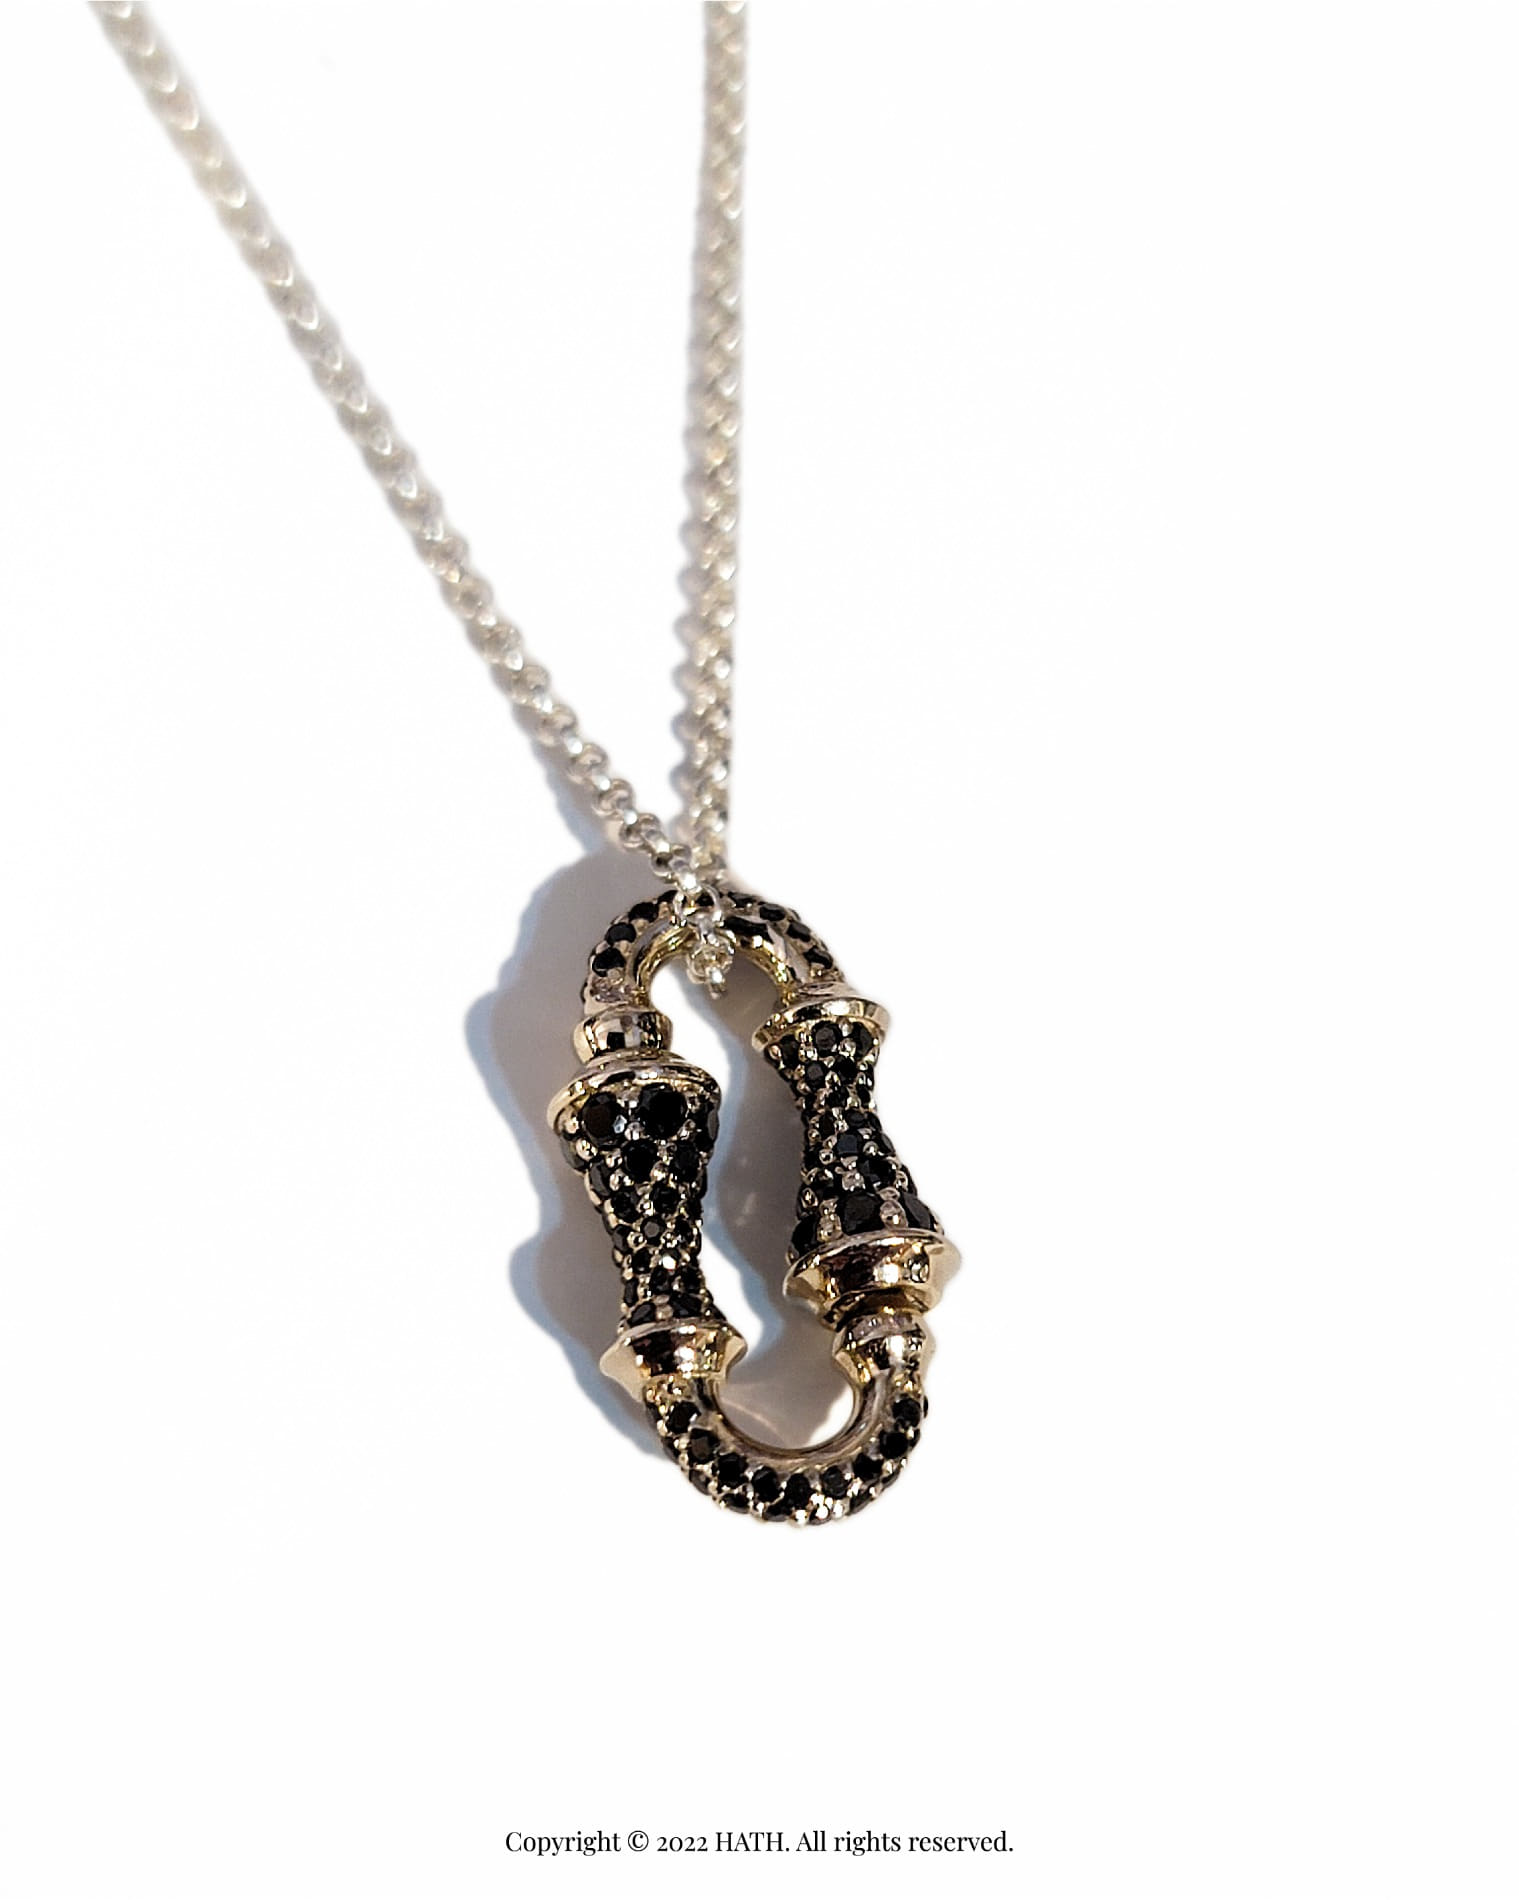 ARC T2 Necklace in 18k Yellow Gold with Black Diamonds